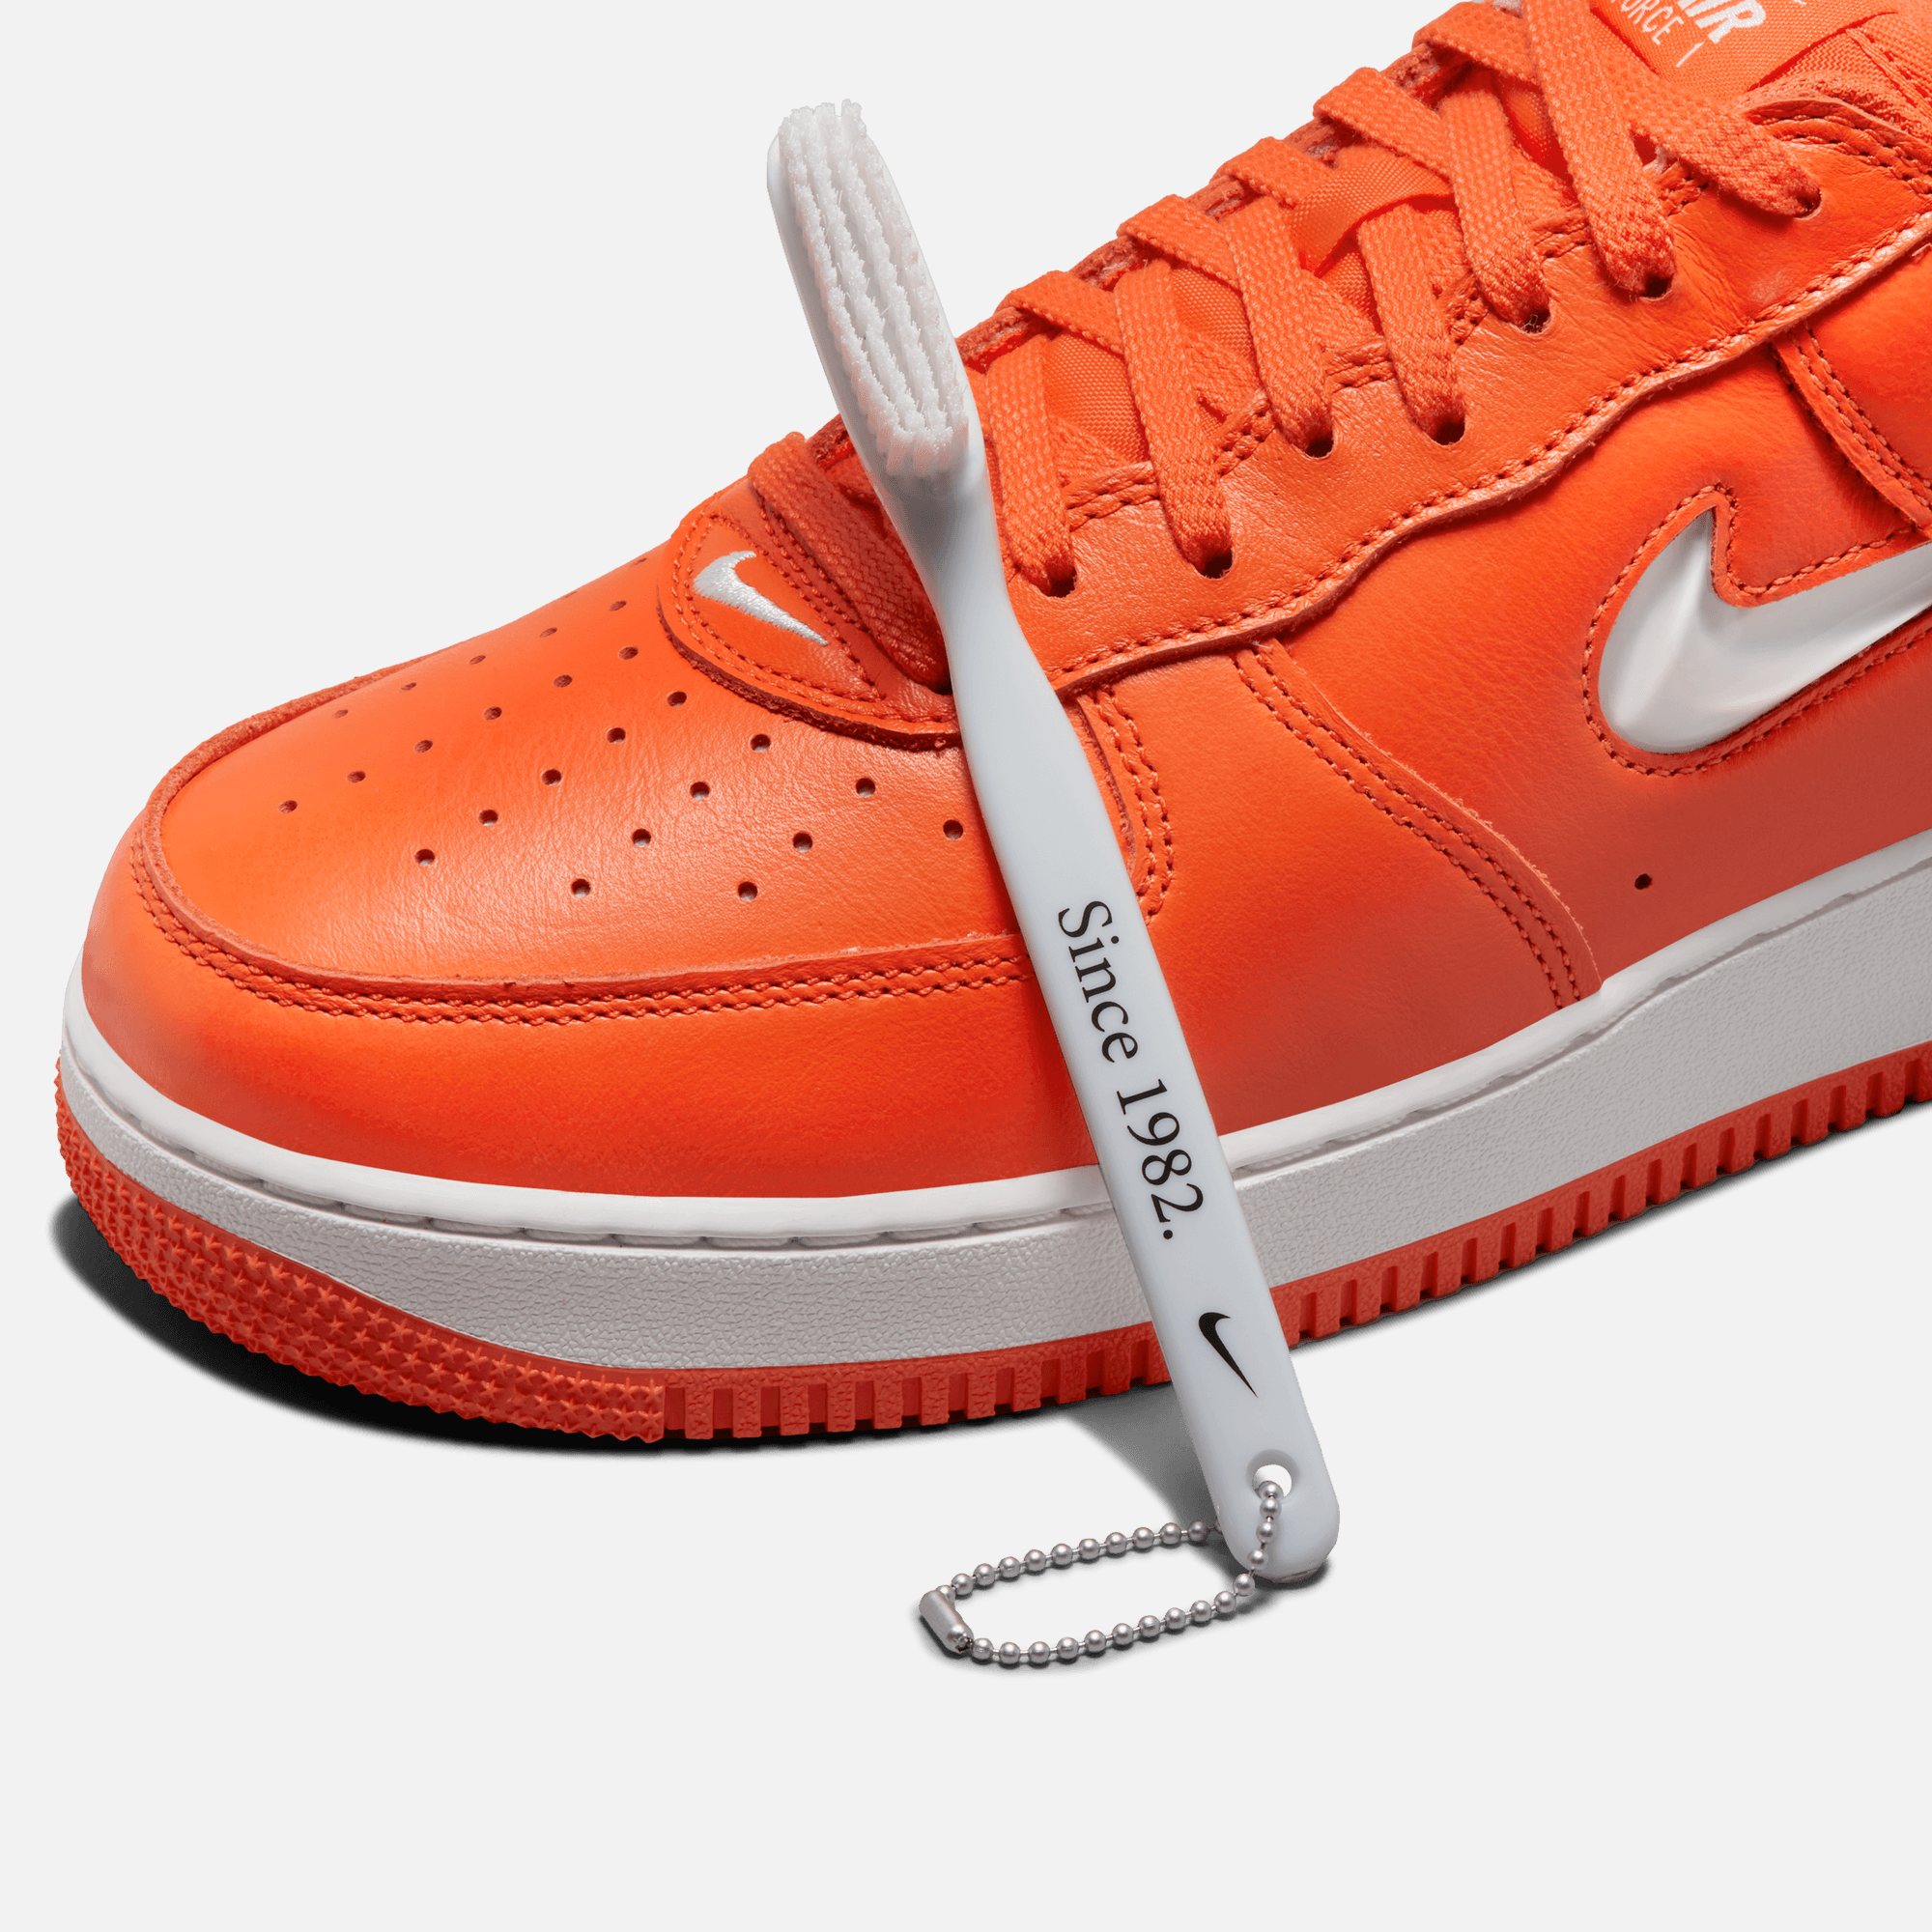 Nike Air Force 1 Low Color of the Month 'Orange Jewel'